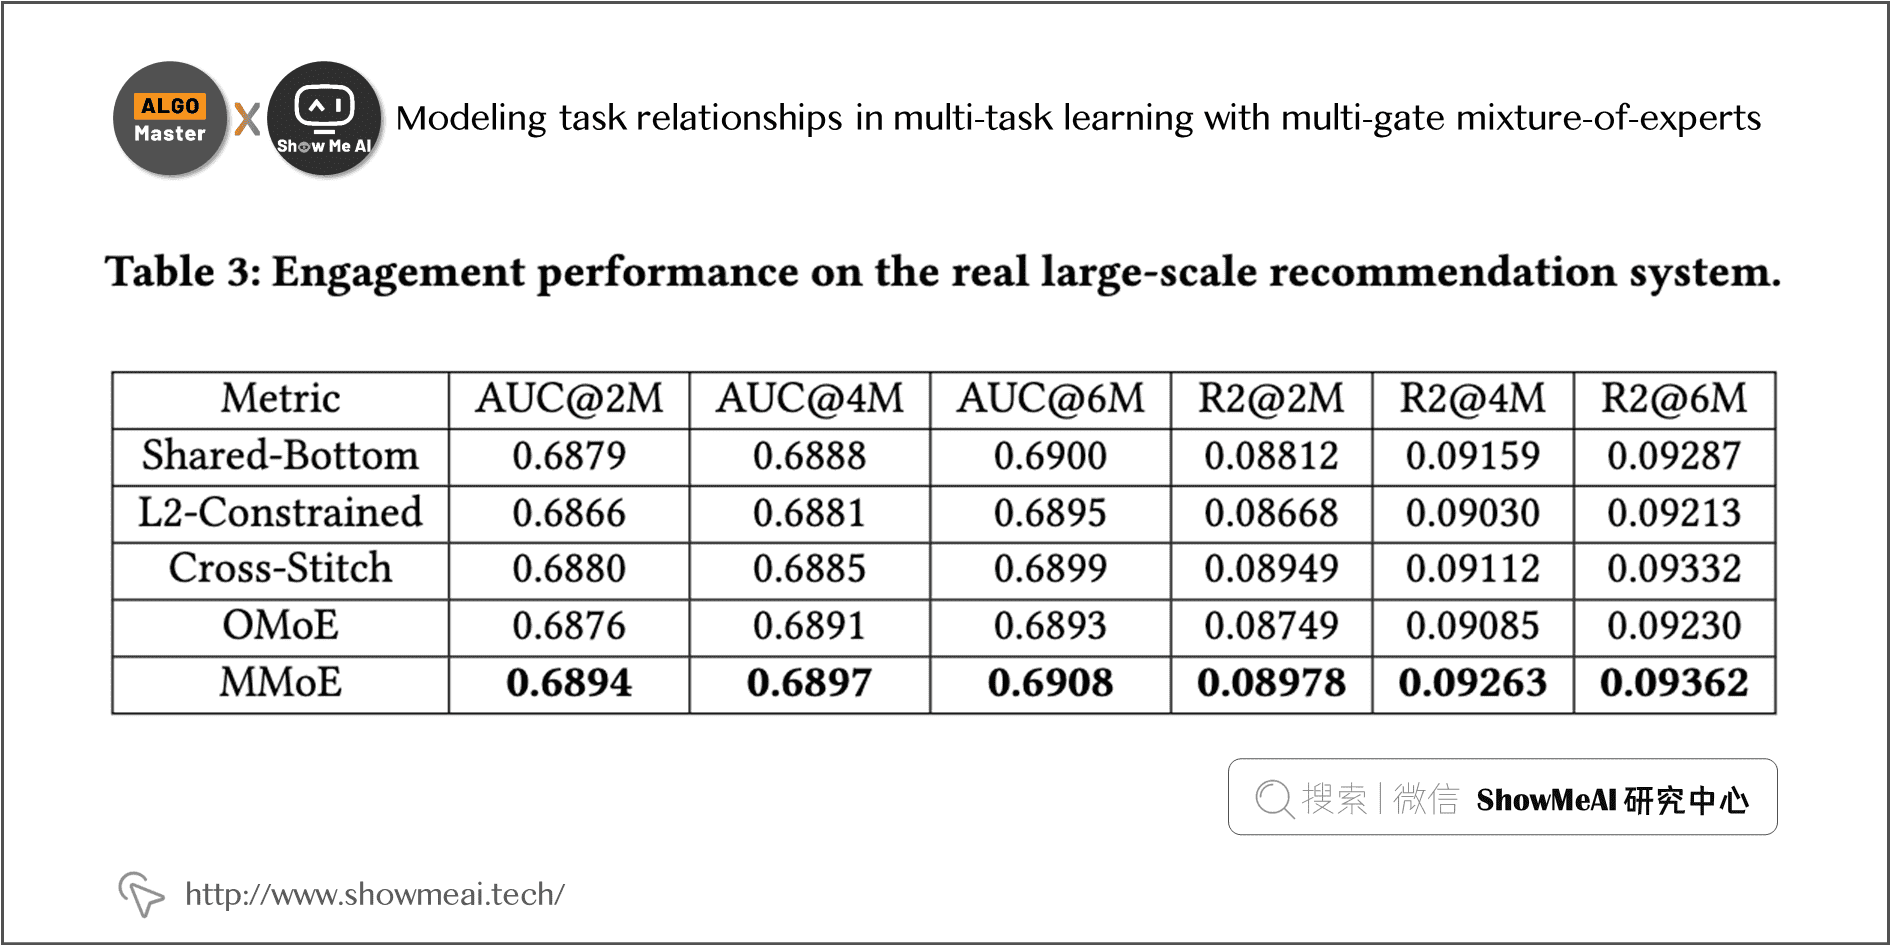 Modeling task relationships in multi-task learning with multi-gate mixture-of-experts; 1-16